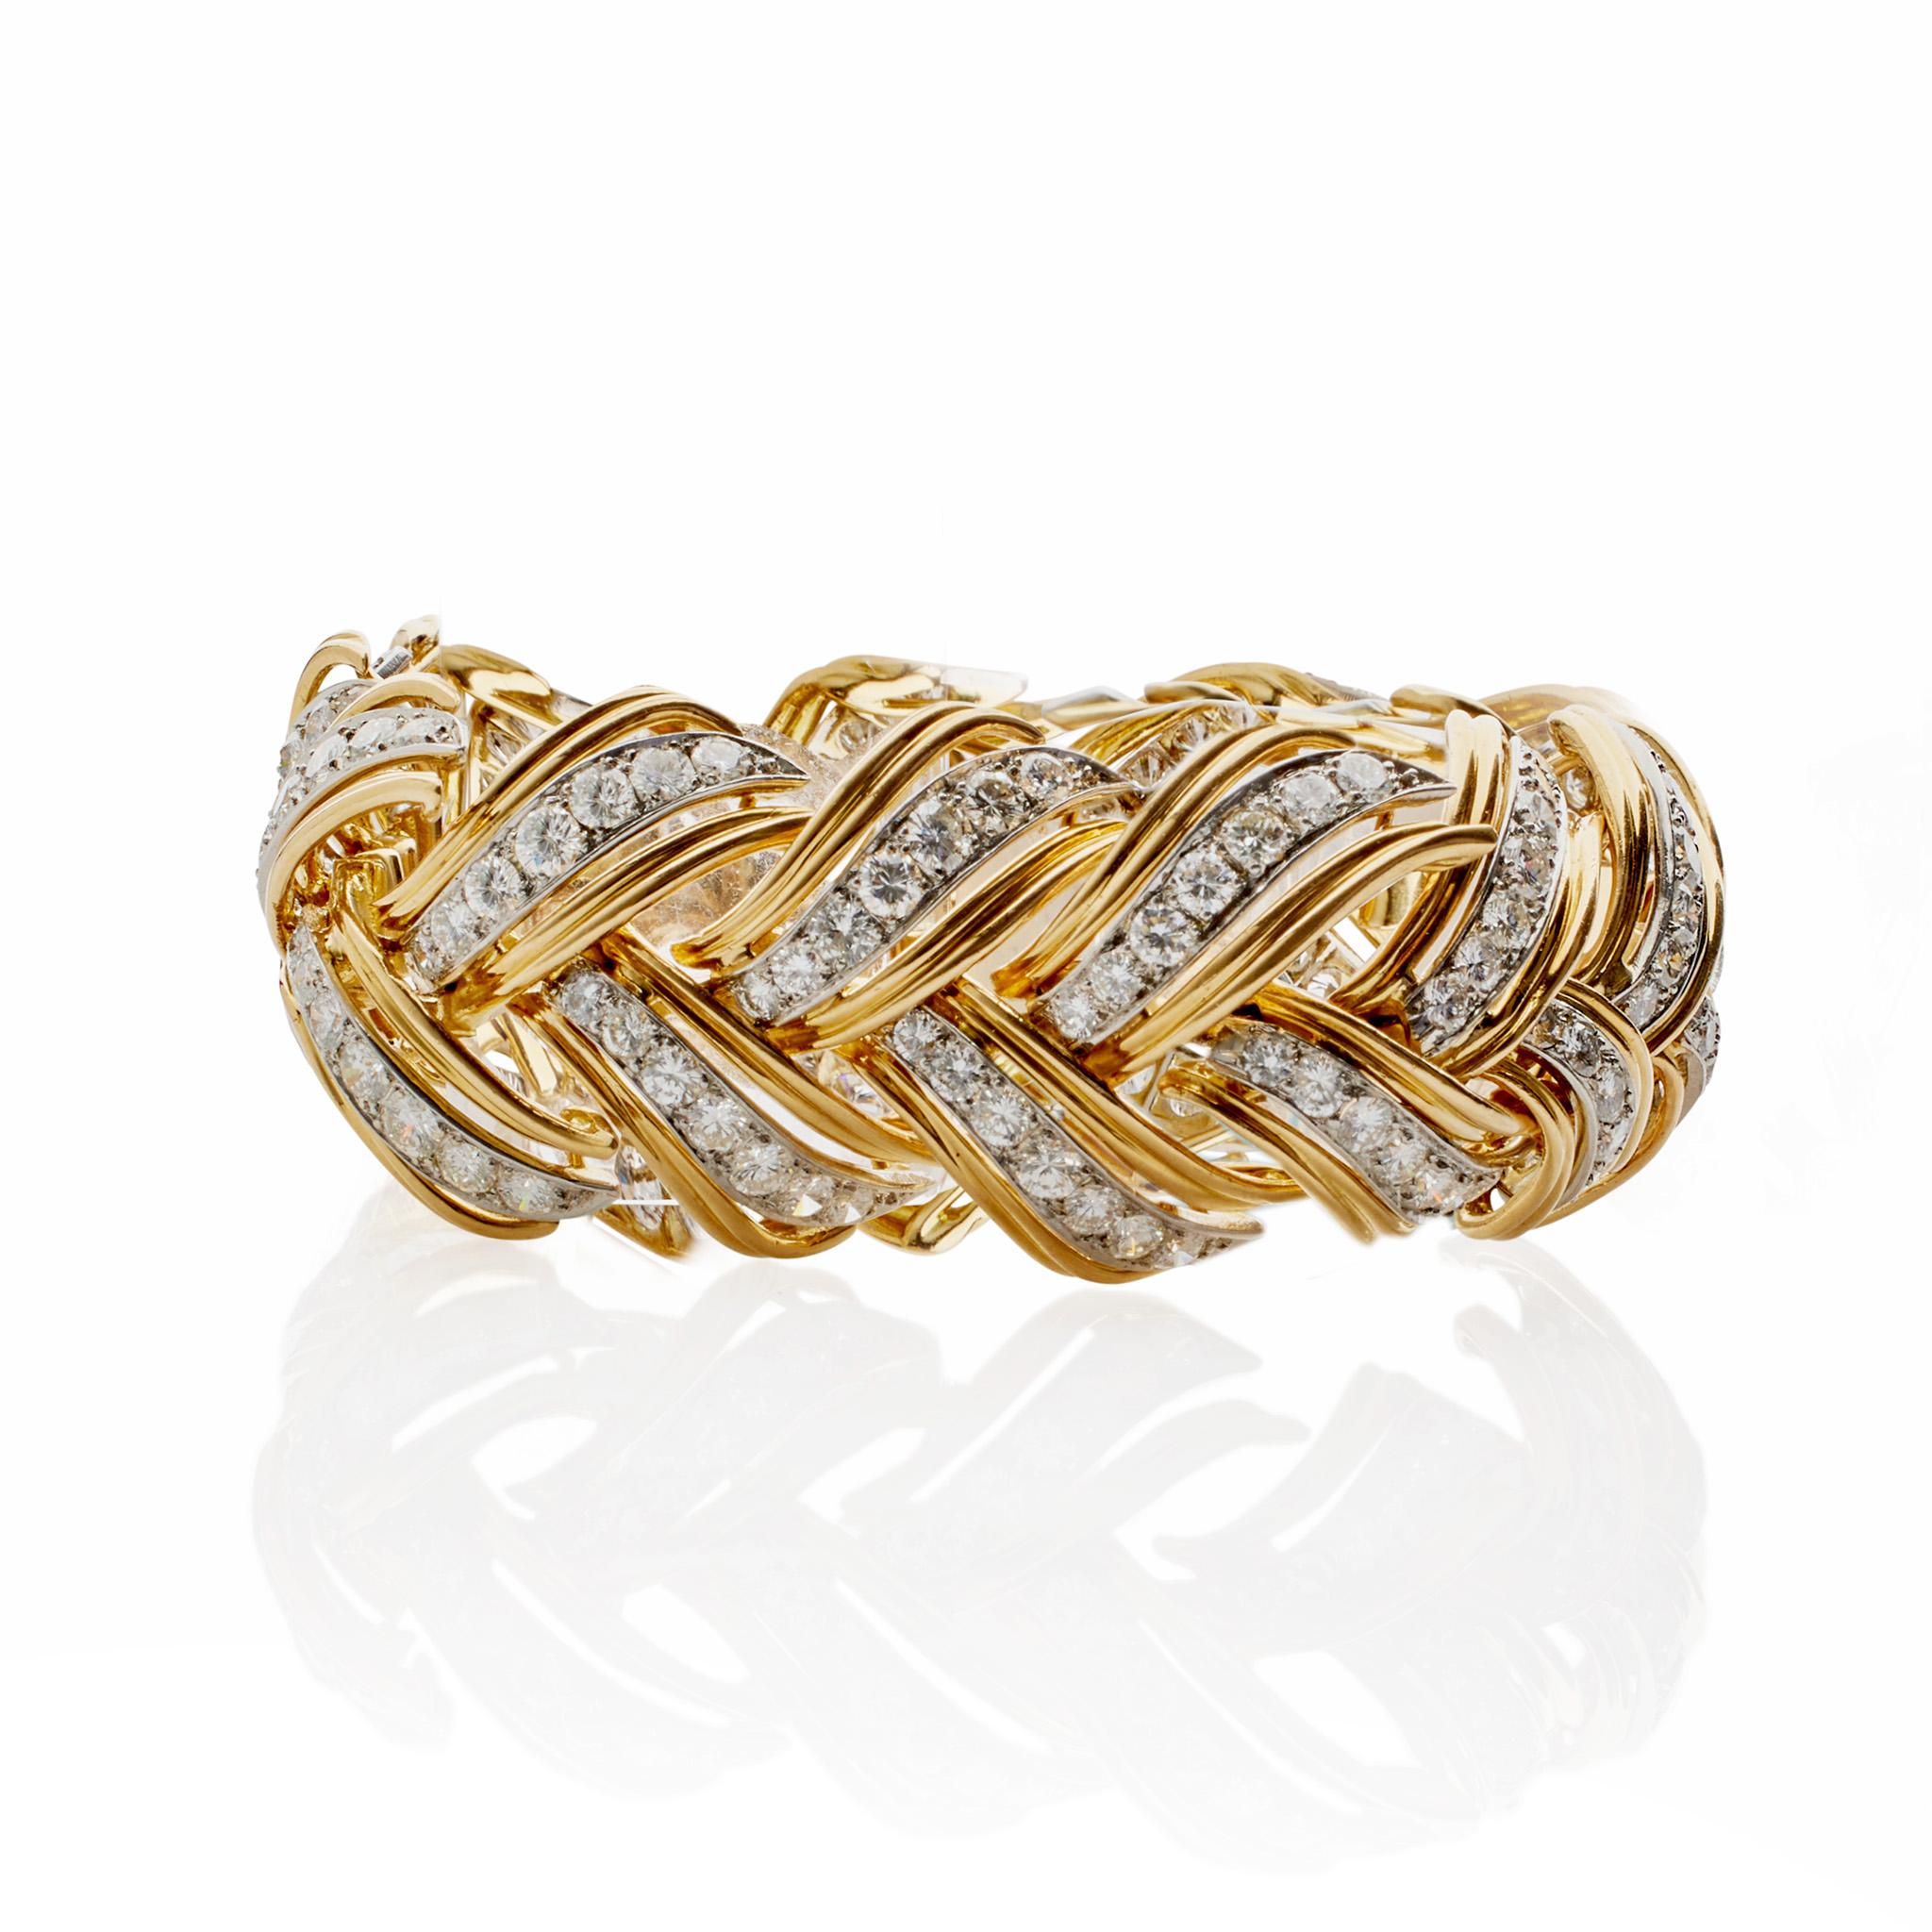 Created in the mid-20th century, this 18K gold, platinum and diamond bombé bracelet was made in Paris, France by André Vassort. Set with over 14.00 carats of diamonds, the articulated bombé bracelet is designed as a series of overlapping 18K gold